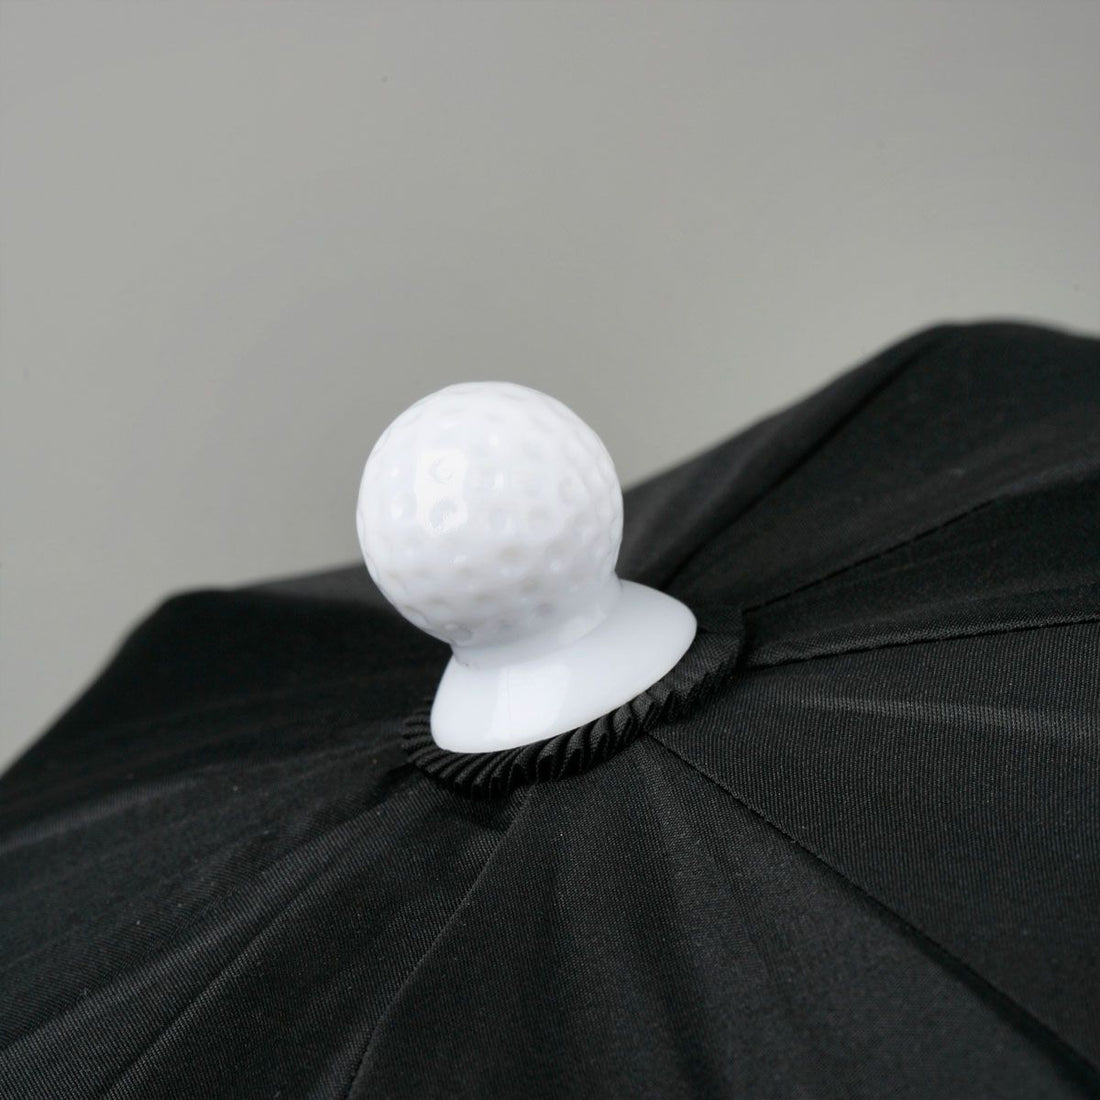 simulated white golf ball on the top of an Orlimar Dri-Clubz Golf Bag Umbrella